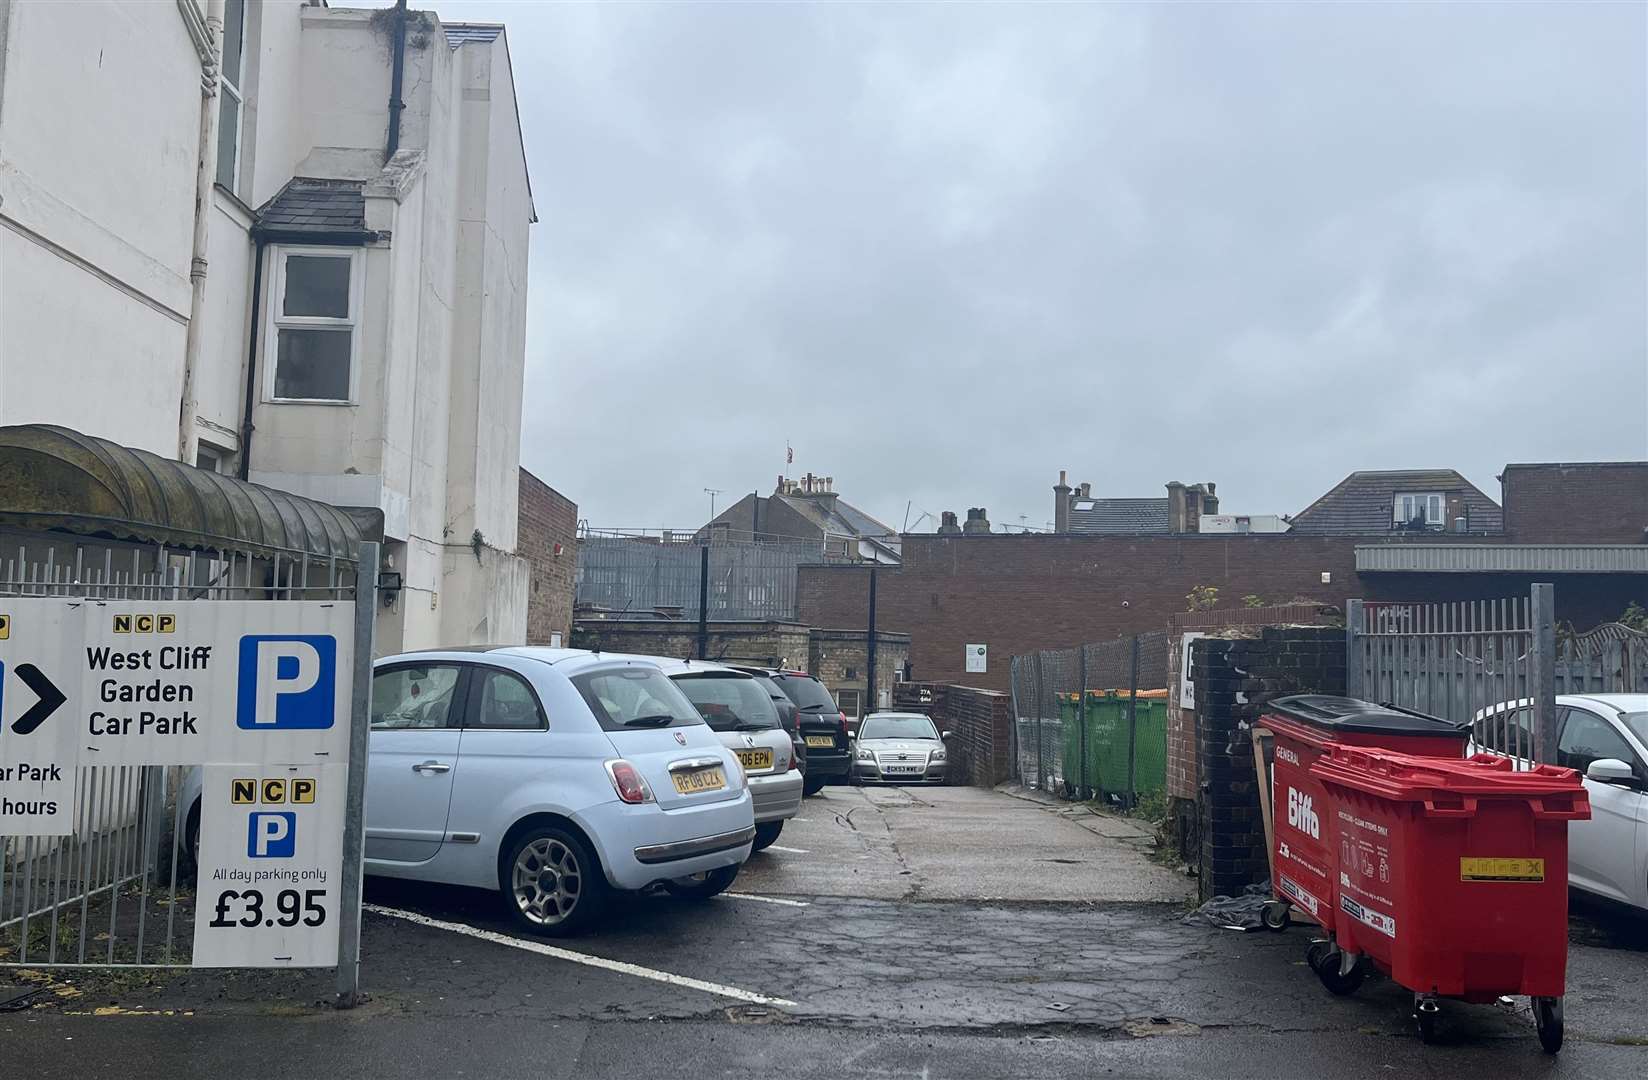 The proposed site for the five-storey flat block in West Cliff Gardens in Folkestone is currently home to a car park